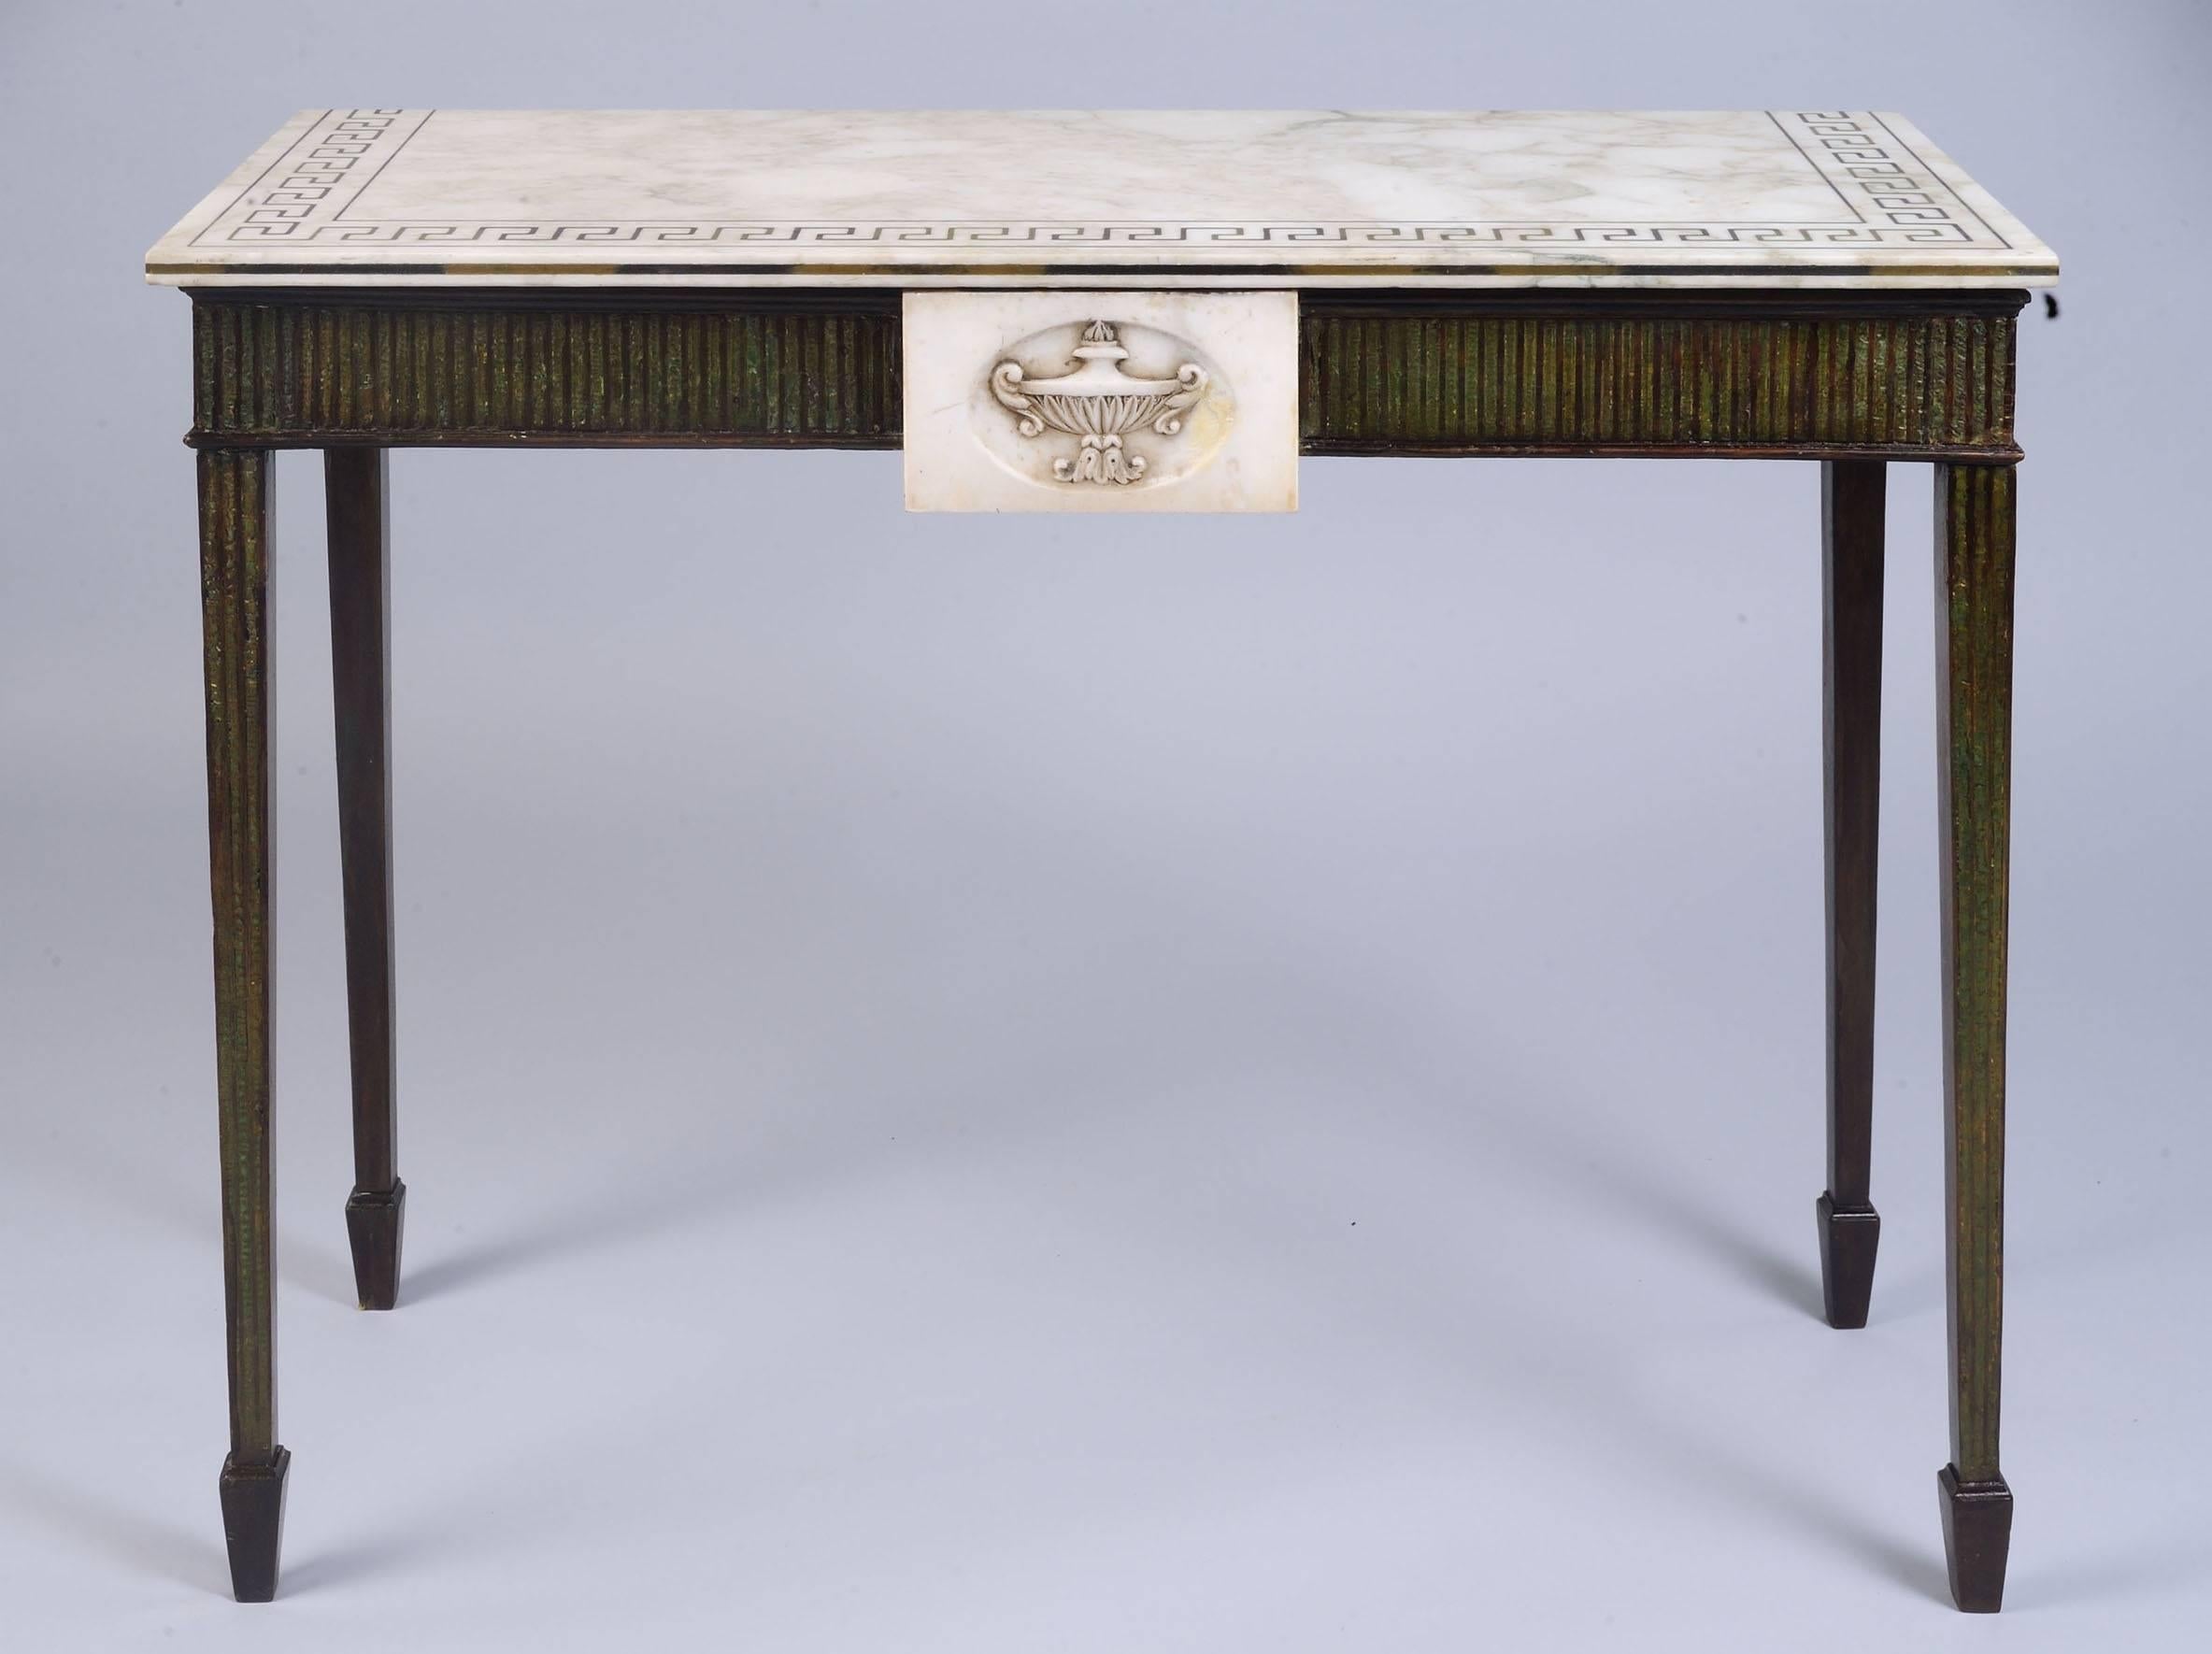 A rare pair of Adam Period Scagliola console tables with marble plaques and marble tops.
United Kingdom, circa 1775-1800.
Measures: 32.5